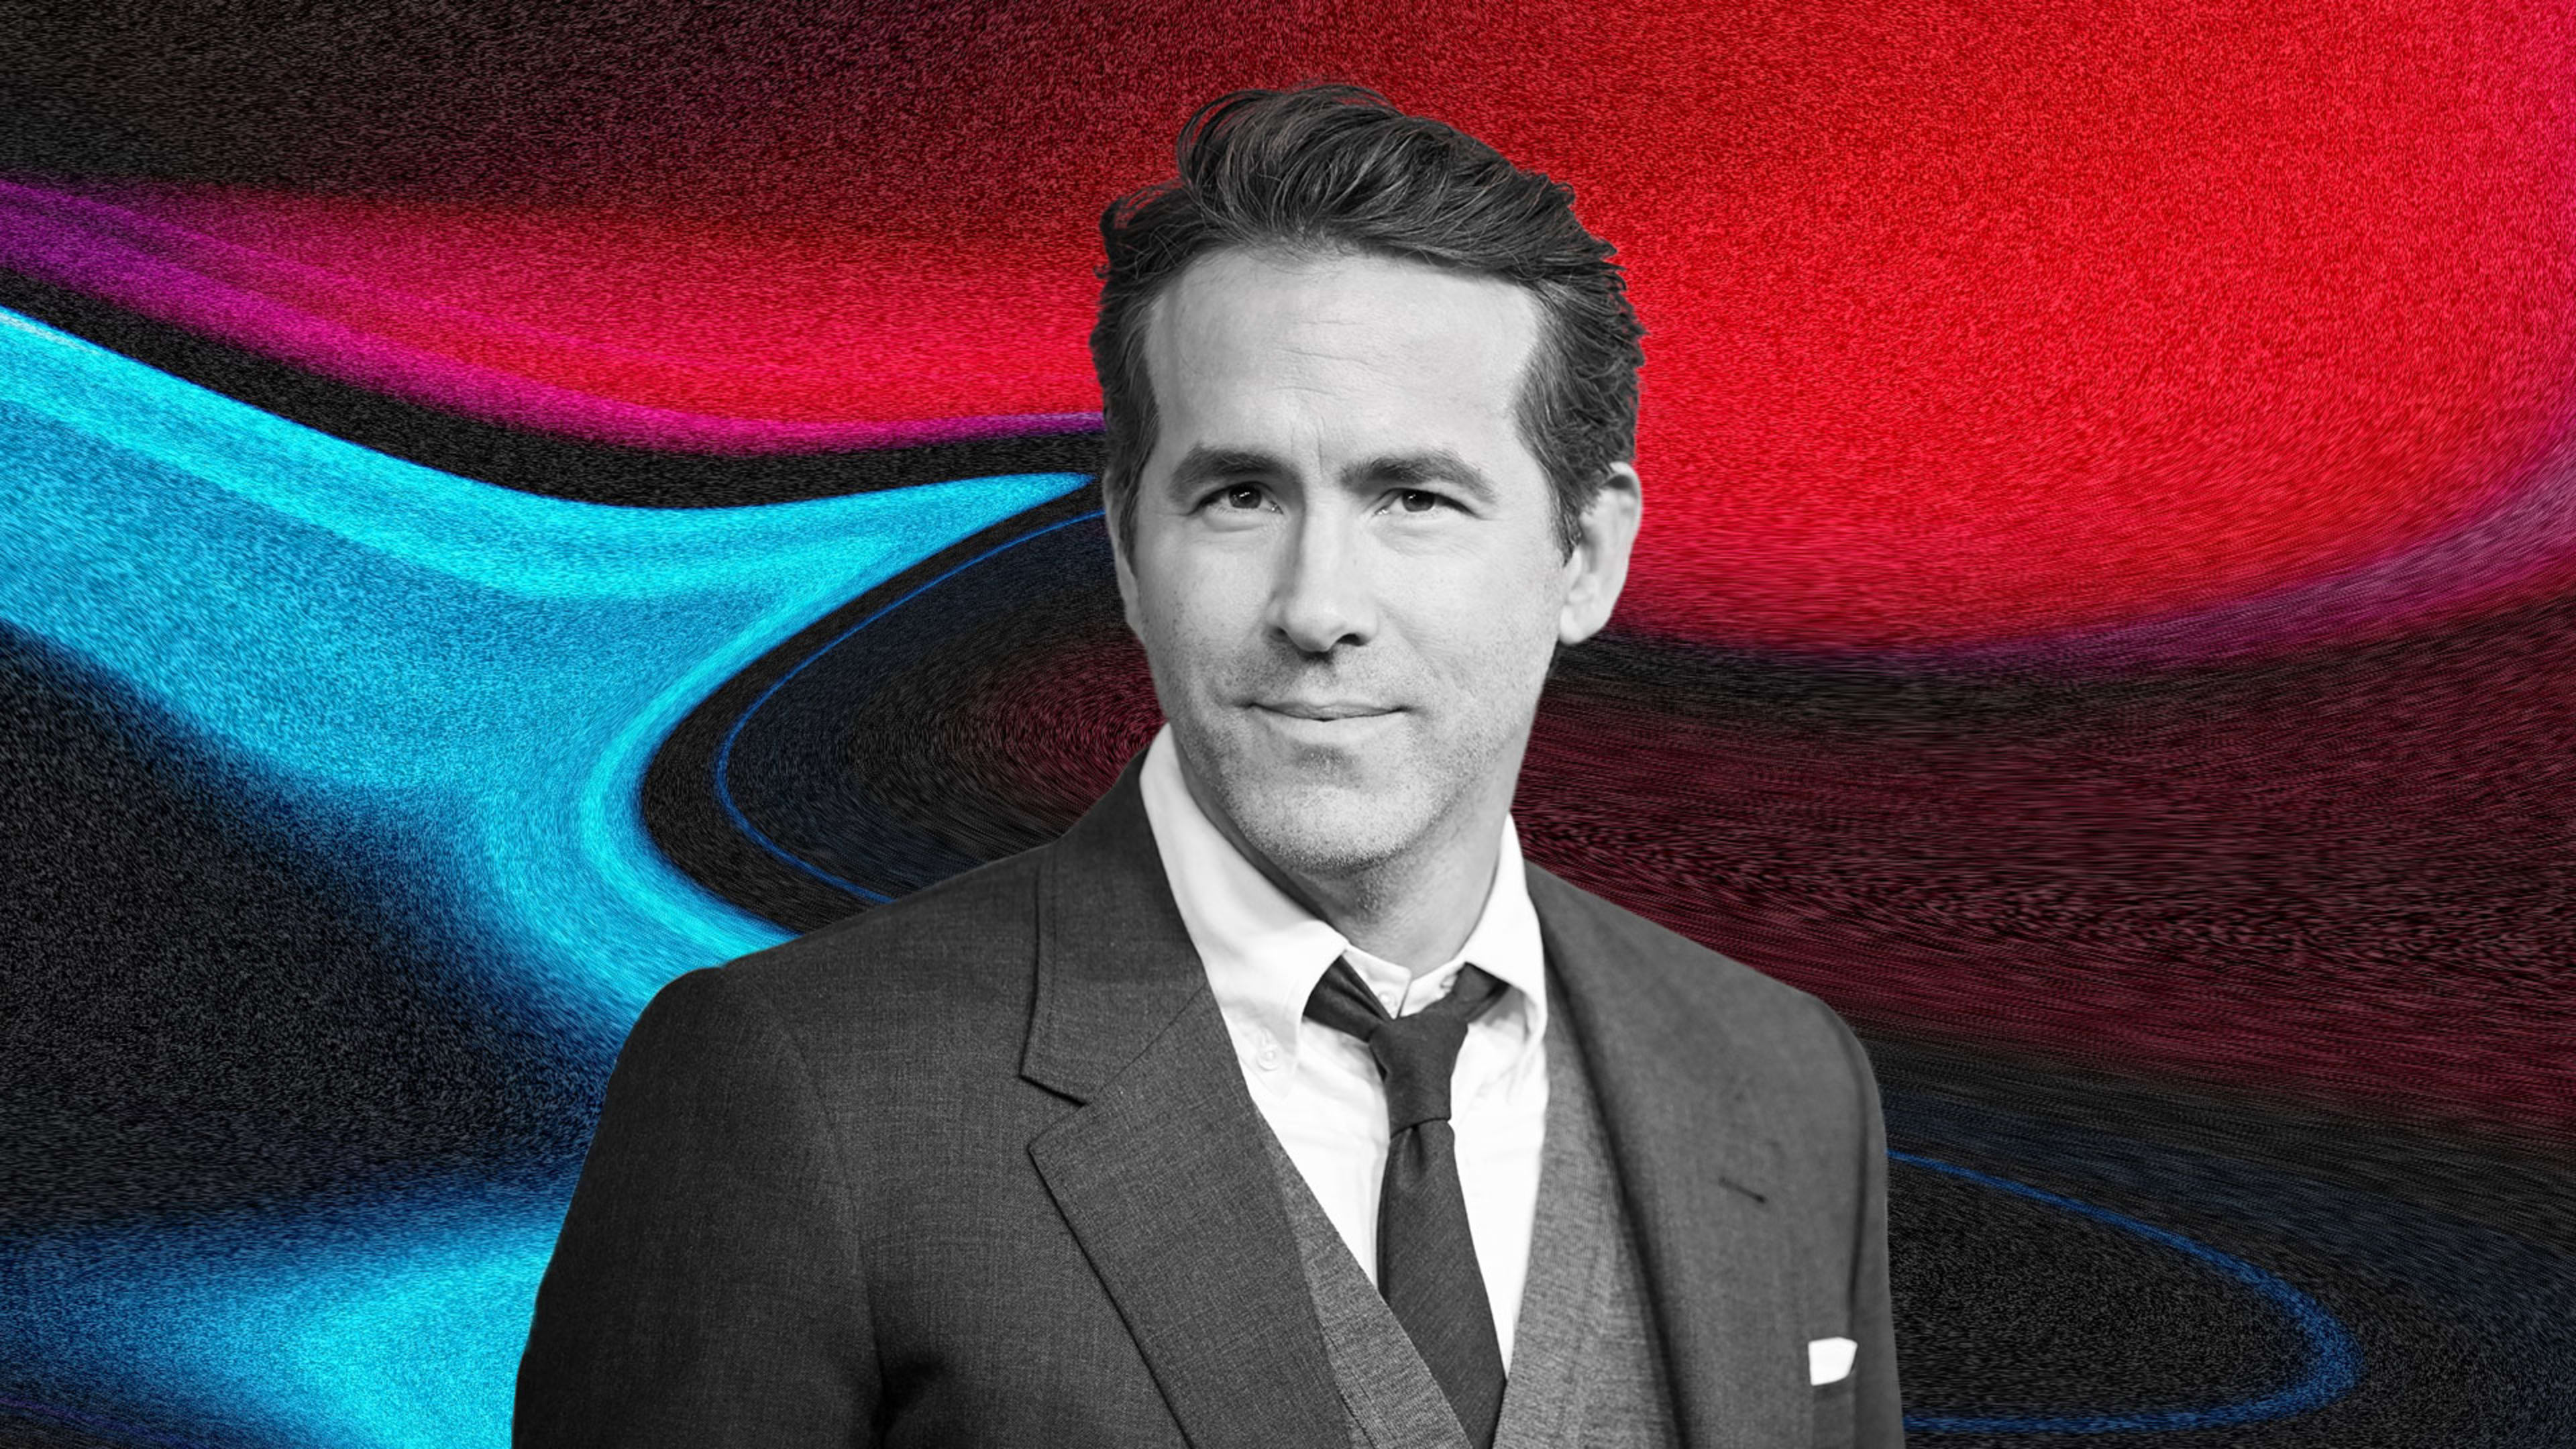 ‘Canadian flex’: Ryan Reynolds is getting into fintech with his latest investment